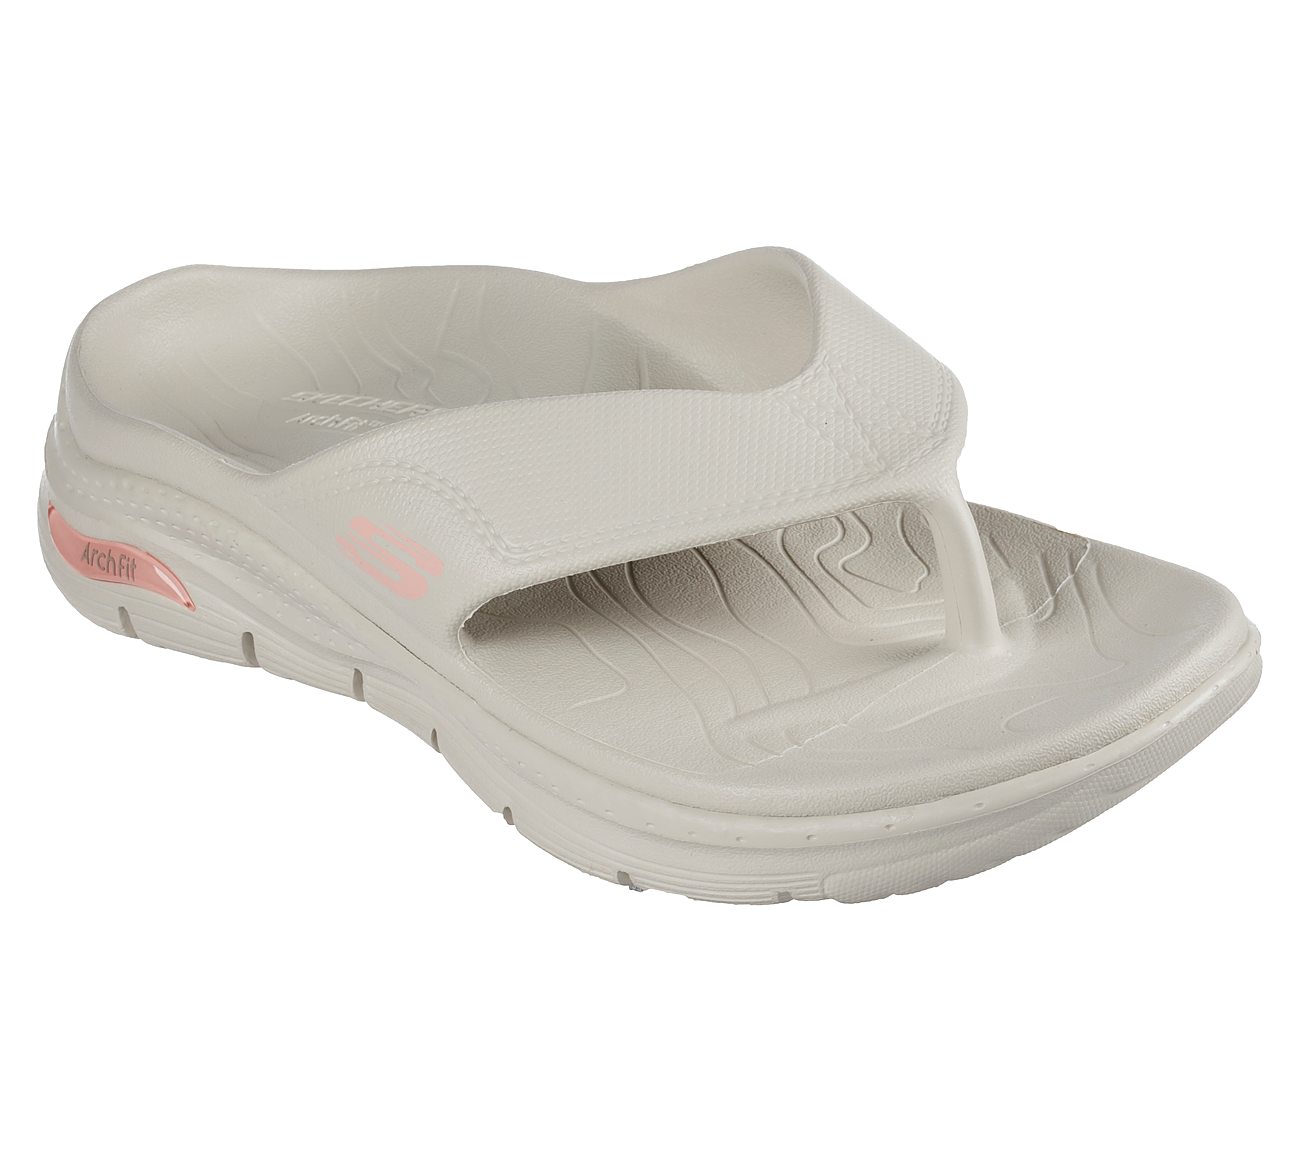 ARCH FIT, NATURAL Footwear Lateral View